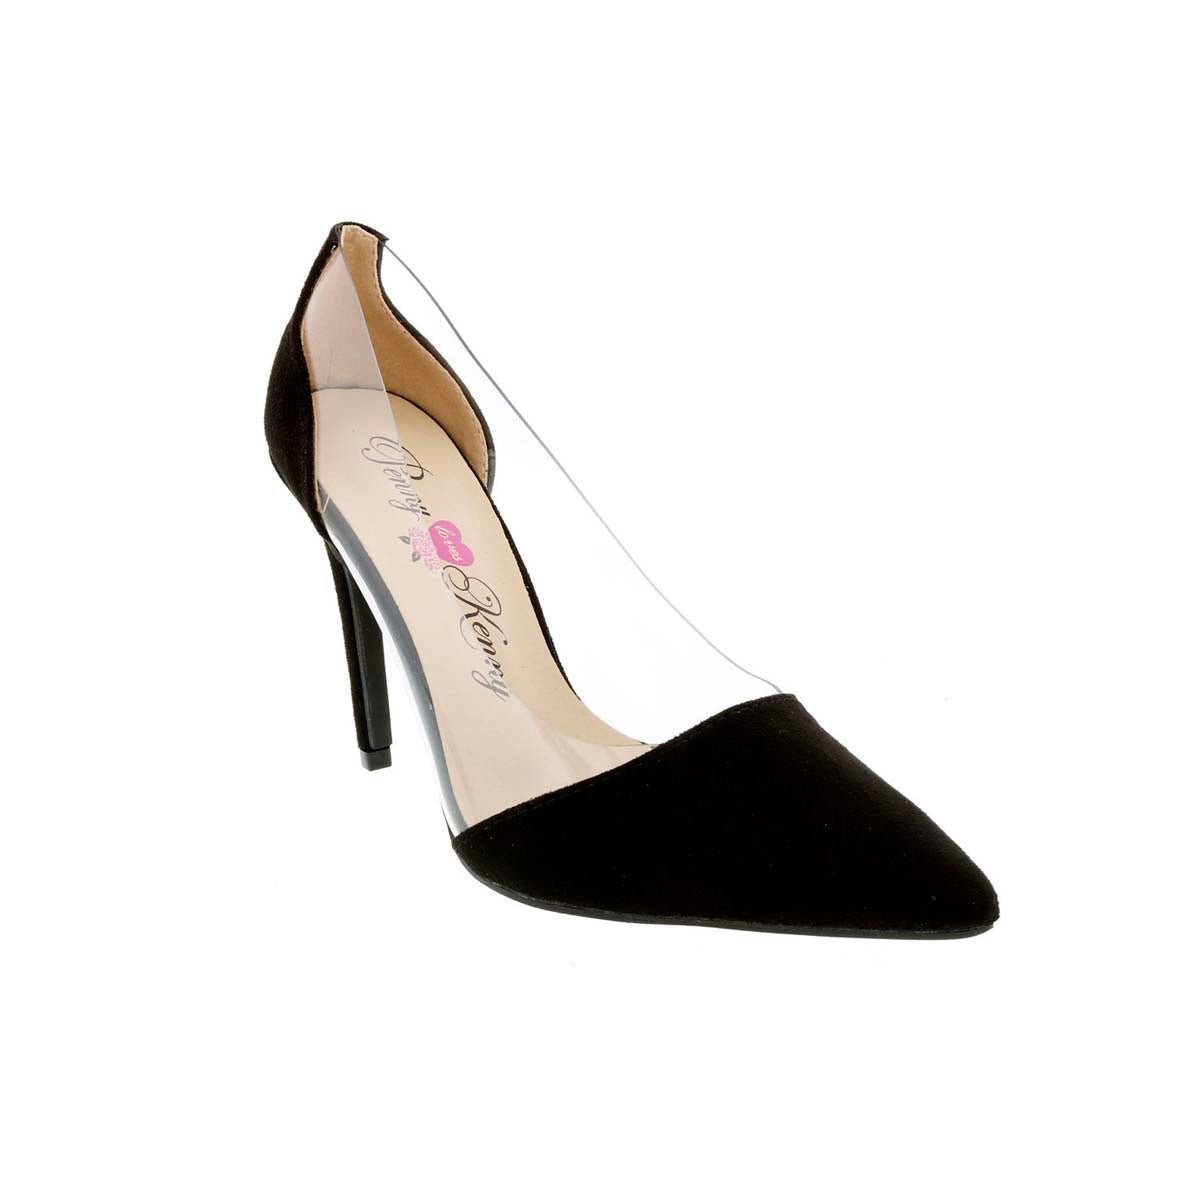 PENNY LOVES KENNY OPIE WOMEN PUMPS SHOE IN BLACK MICRO/LUCITE - TLW Shoes